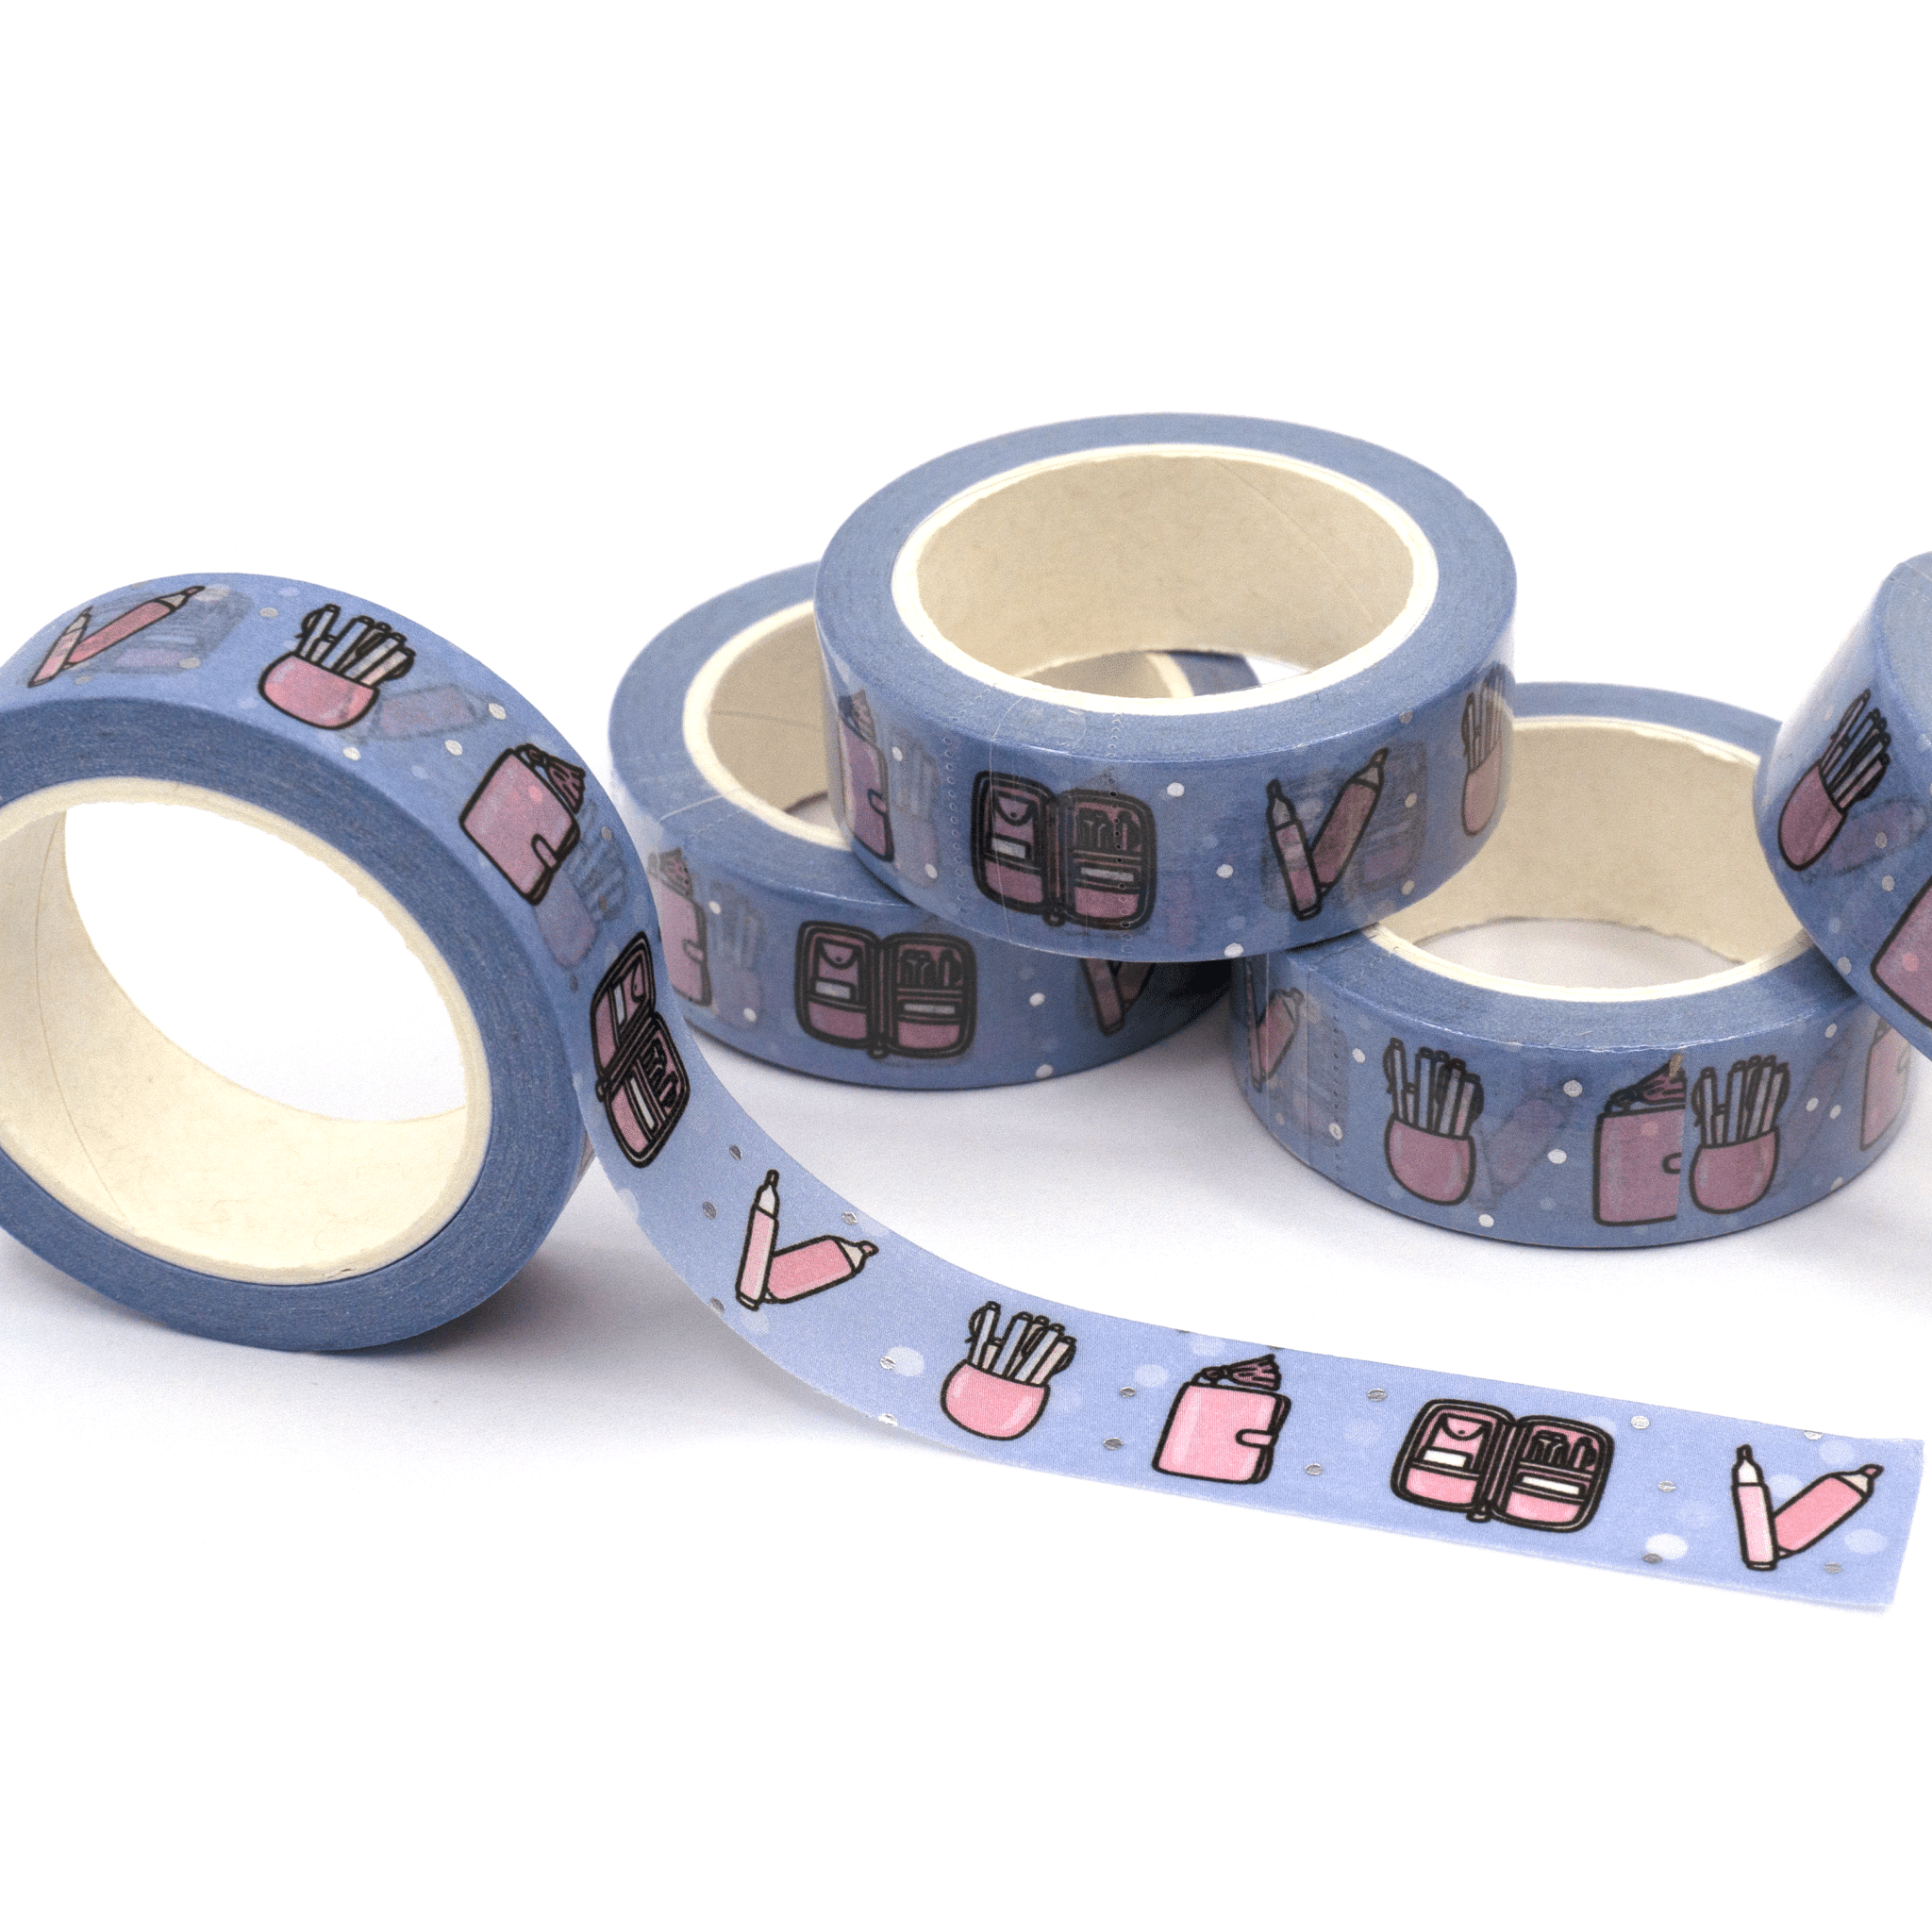 Planning | Silver Foiled Doodle Washi Tape by Plannerface